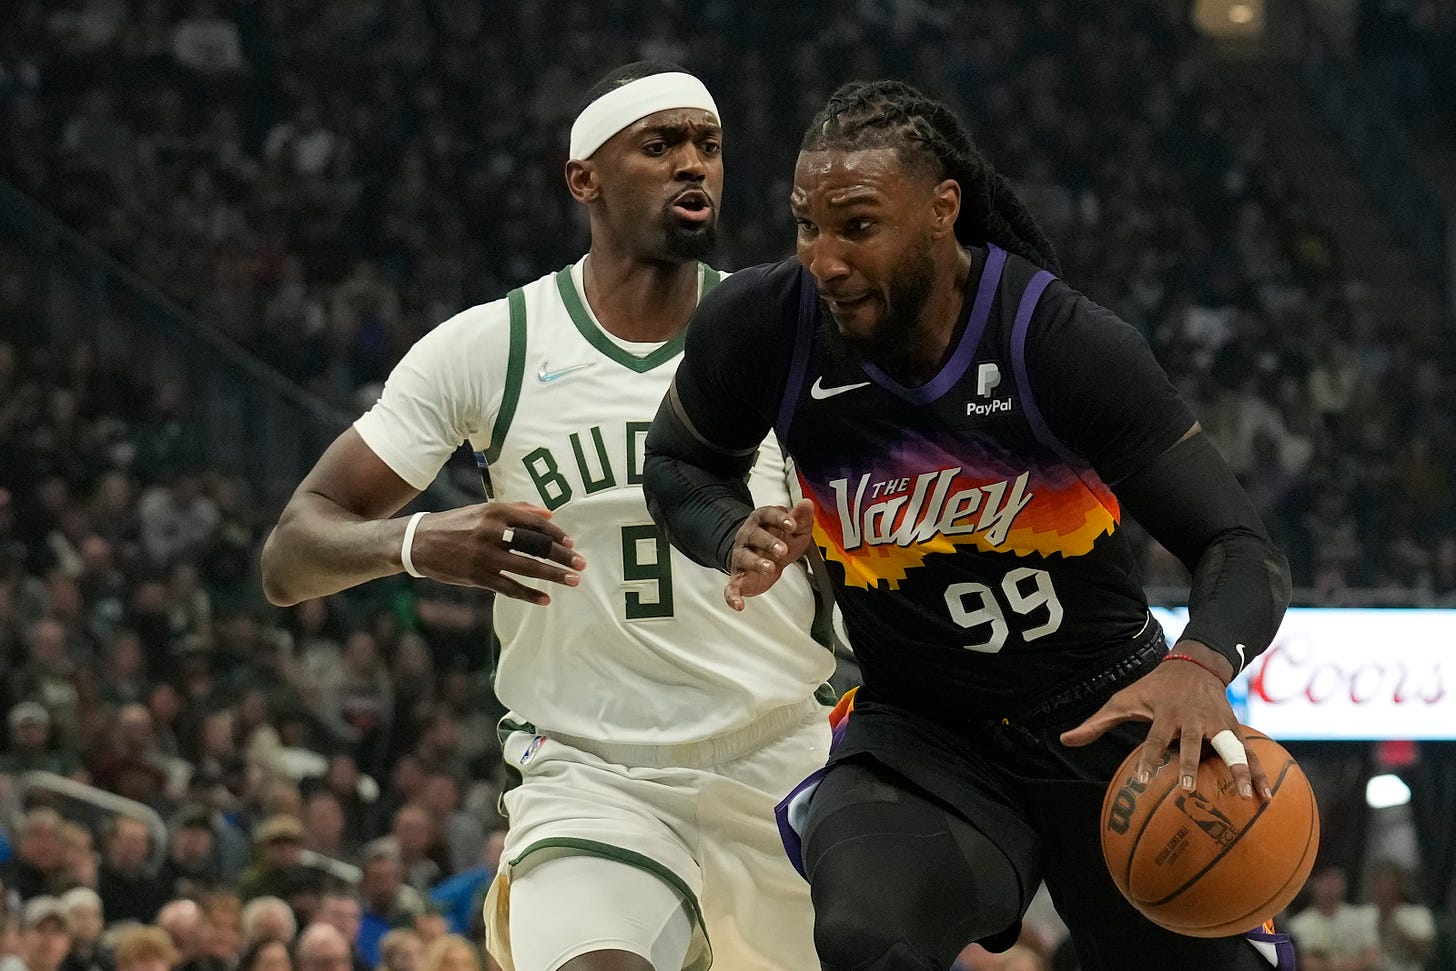 Jae Crowder's emphatic reaction to being traded to the Milwaukee Bucks